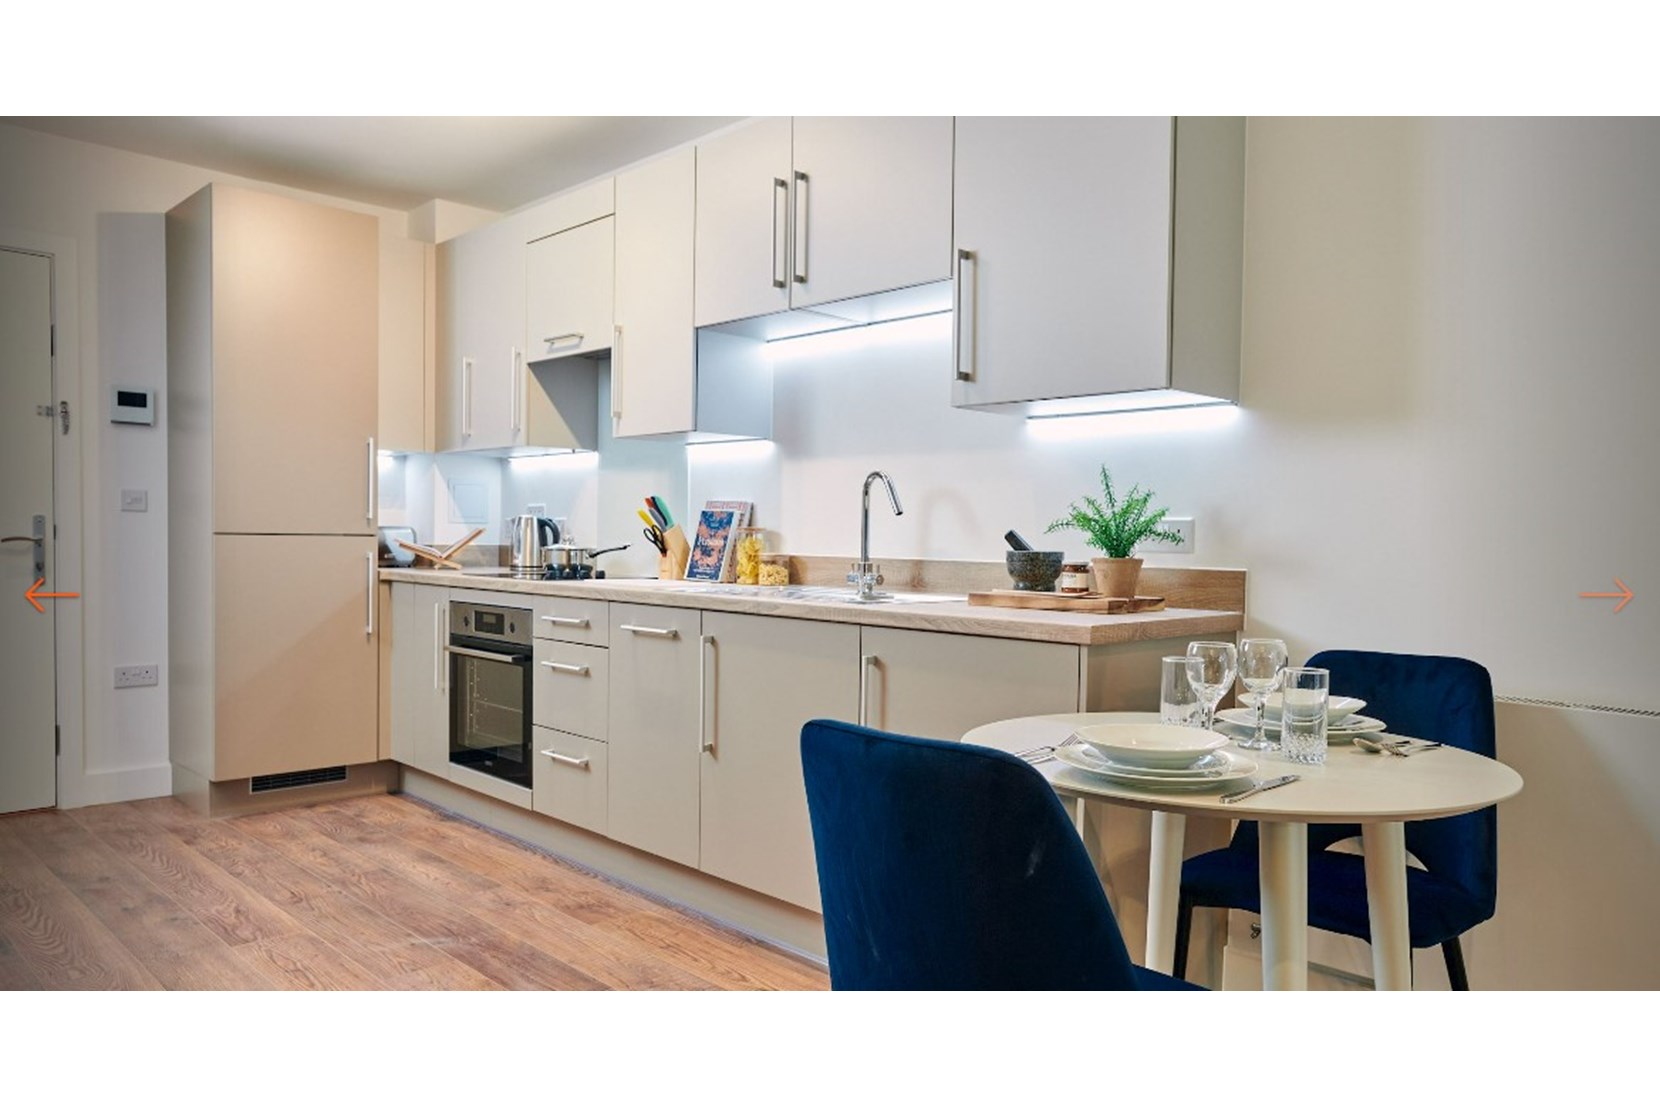 Apartment-APO-Group-Barking-Greater-London-interior-kitchen-dining-room